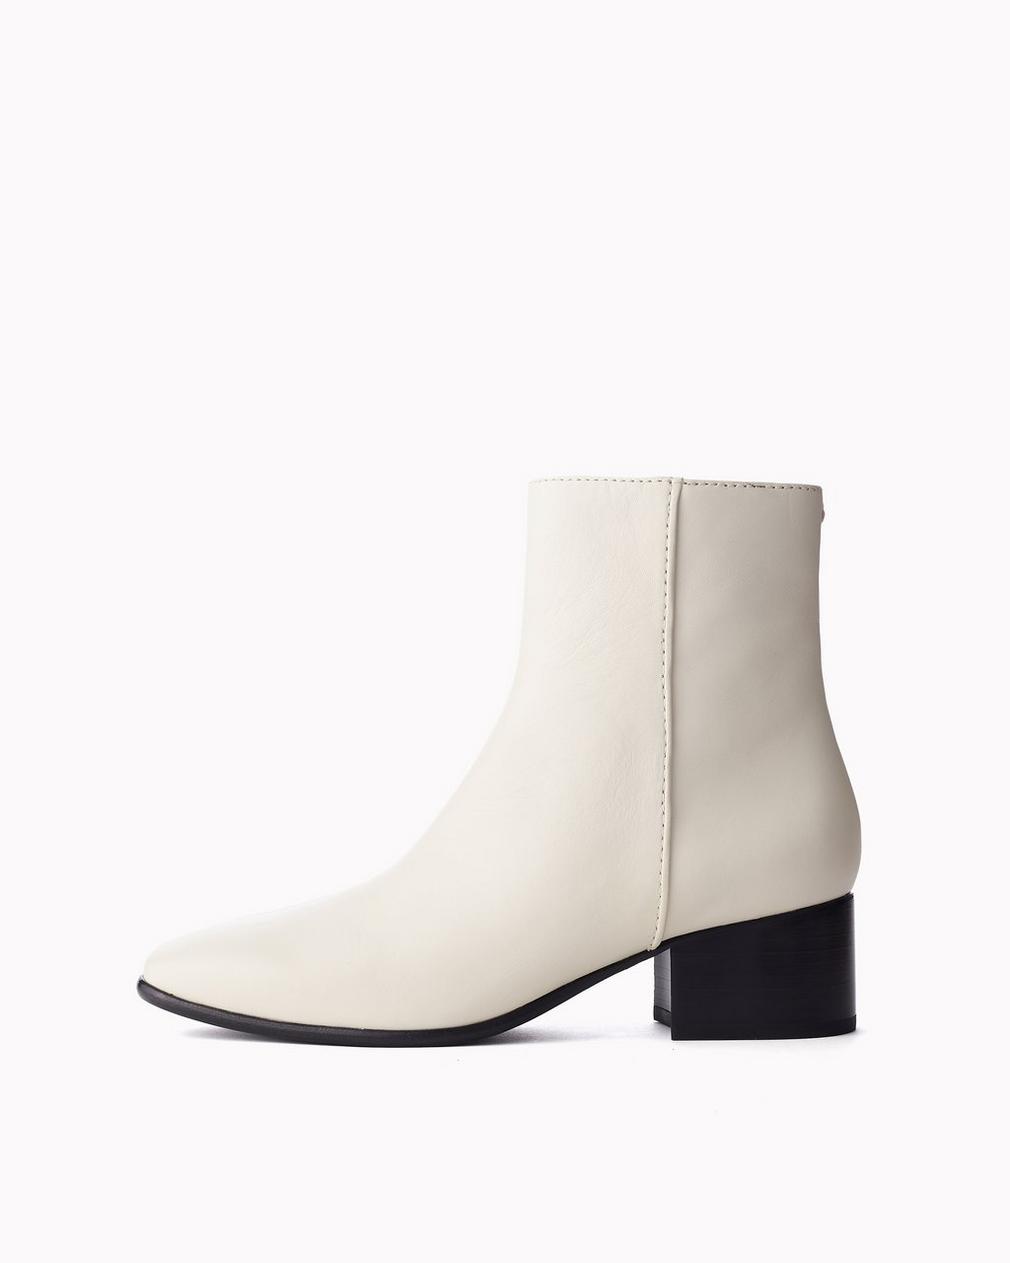 Rag & Bone - ASLEN MID BOOT - Leather Chelsea Ankle Bootie - Size 7